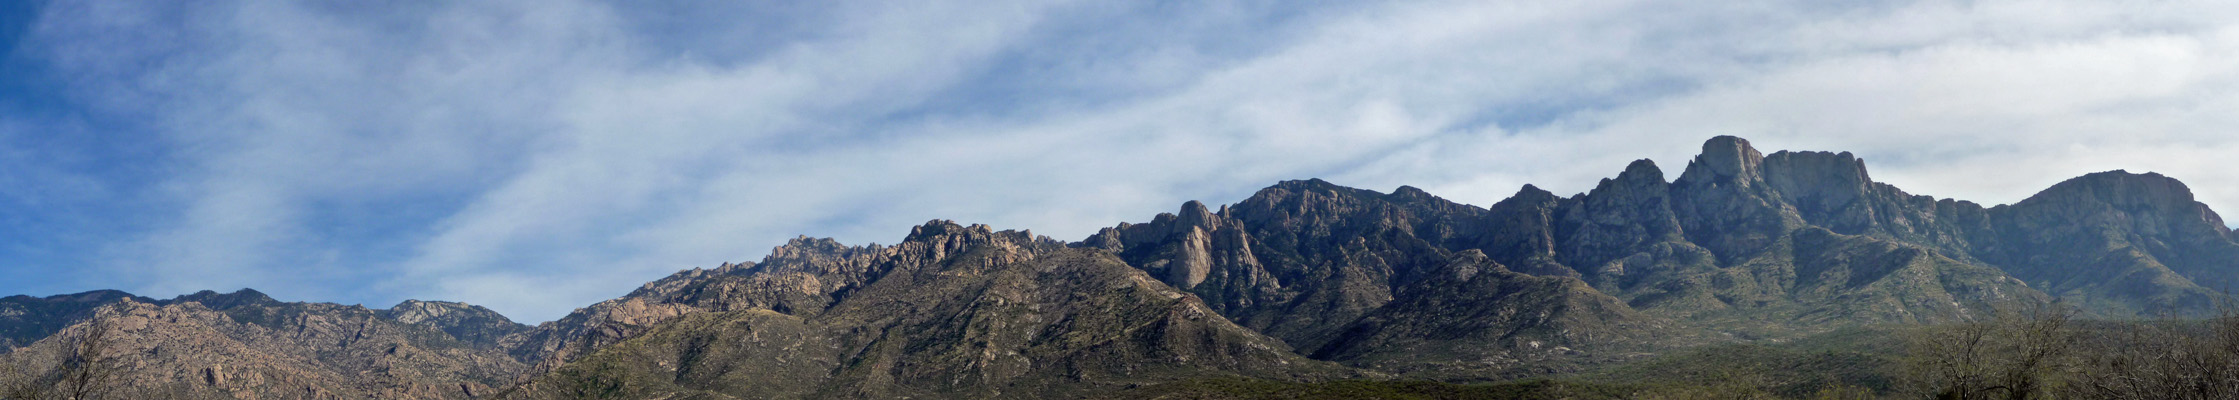 Catalina State Park campsite view